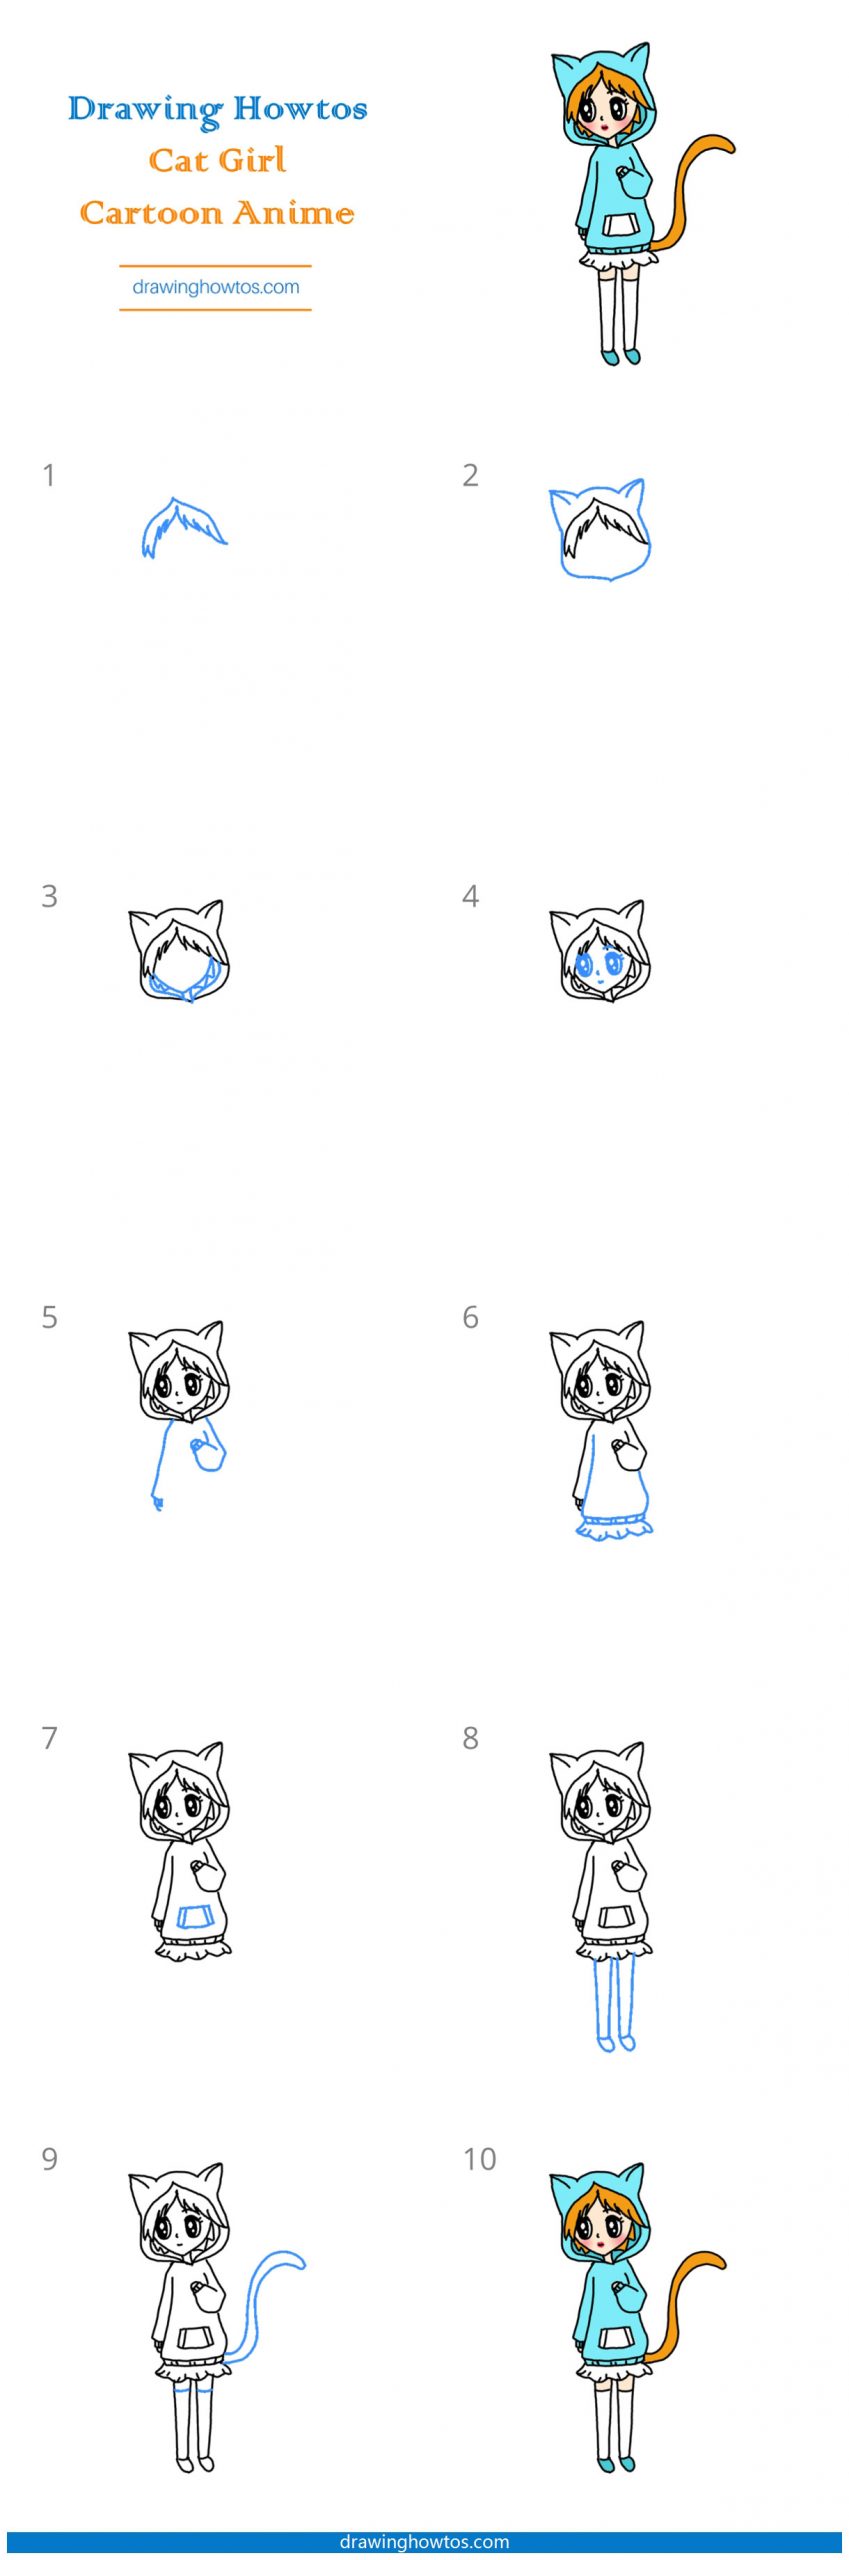 How to Draw a Anime Girl with Cat Hoodie Step by Step